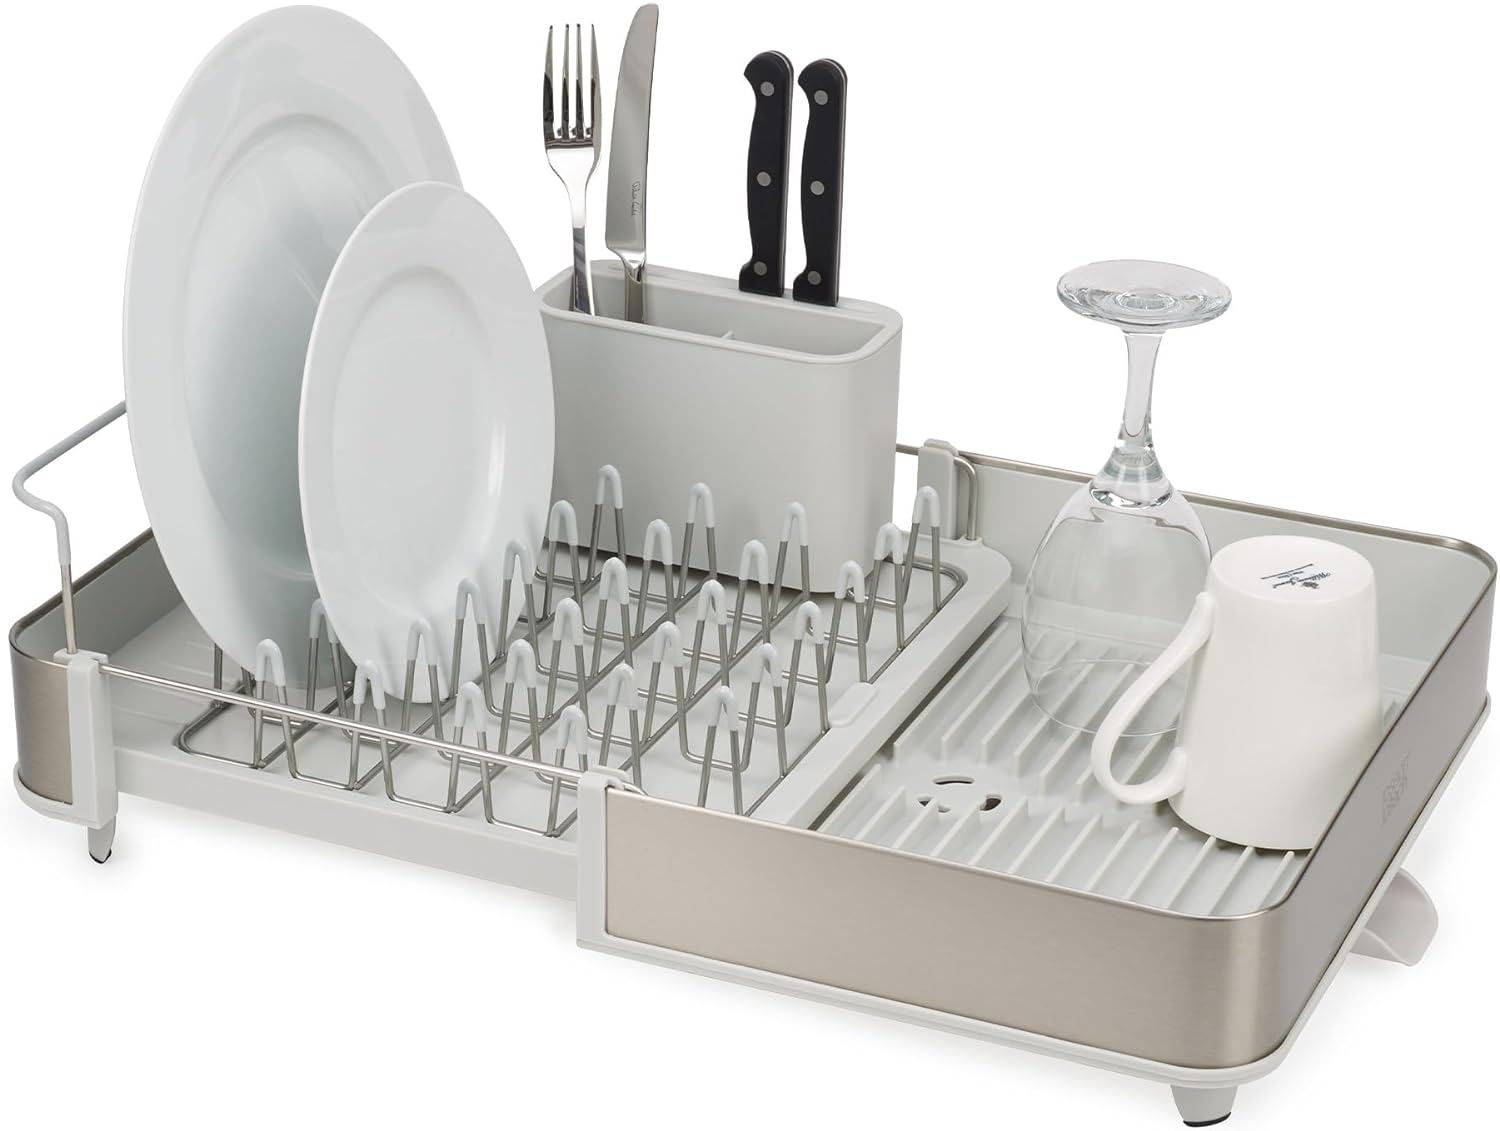 Joseph Joseph Extend Steel Expandable Dish Drainer Rack with Removable Cutlery Holder Swivel Draining Spout, Stainless Steel - Barbecue Whizz...Watch My Smoke!